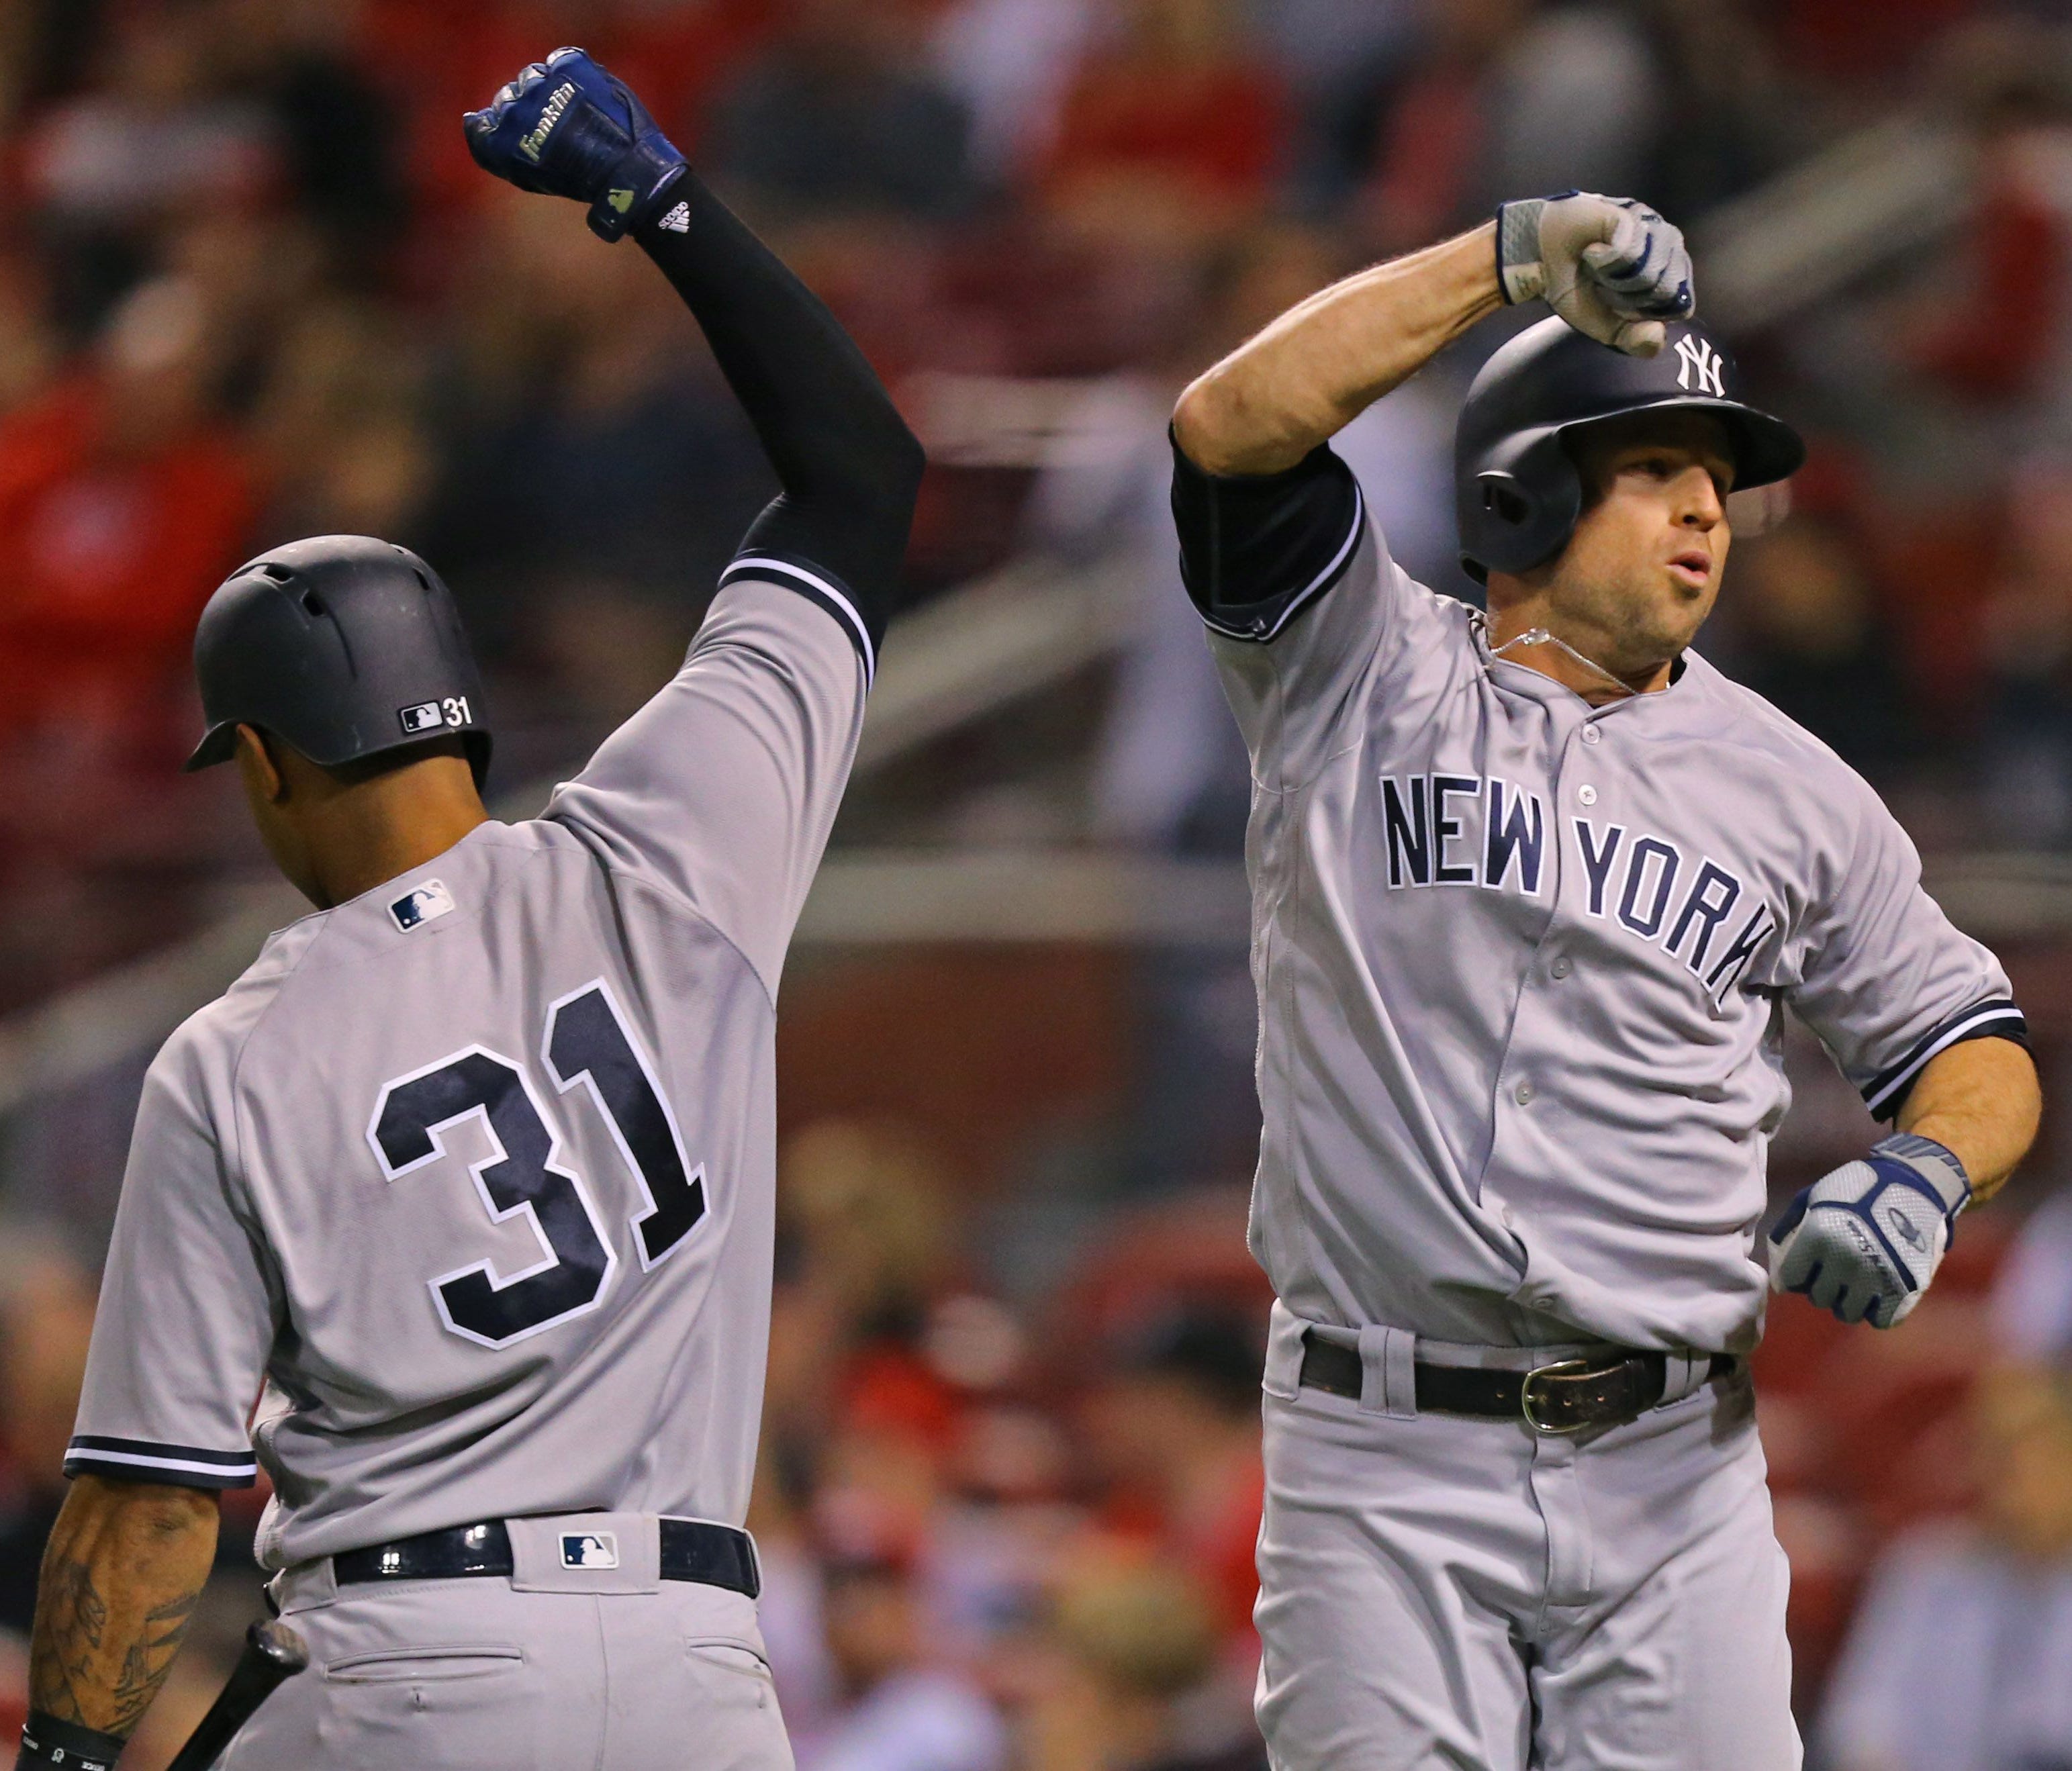 The Yankees' Brett Gardner, right, celebrates with teammate Aaron Hicks, left, after hitting a home run against the Reds in the eighth inning at Great American Ball Park in Cincinnati.